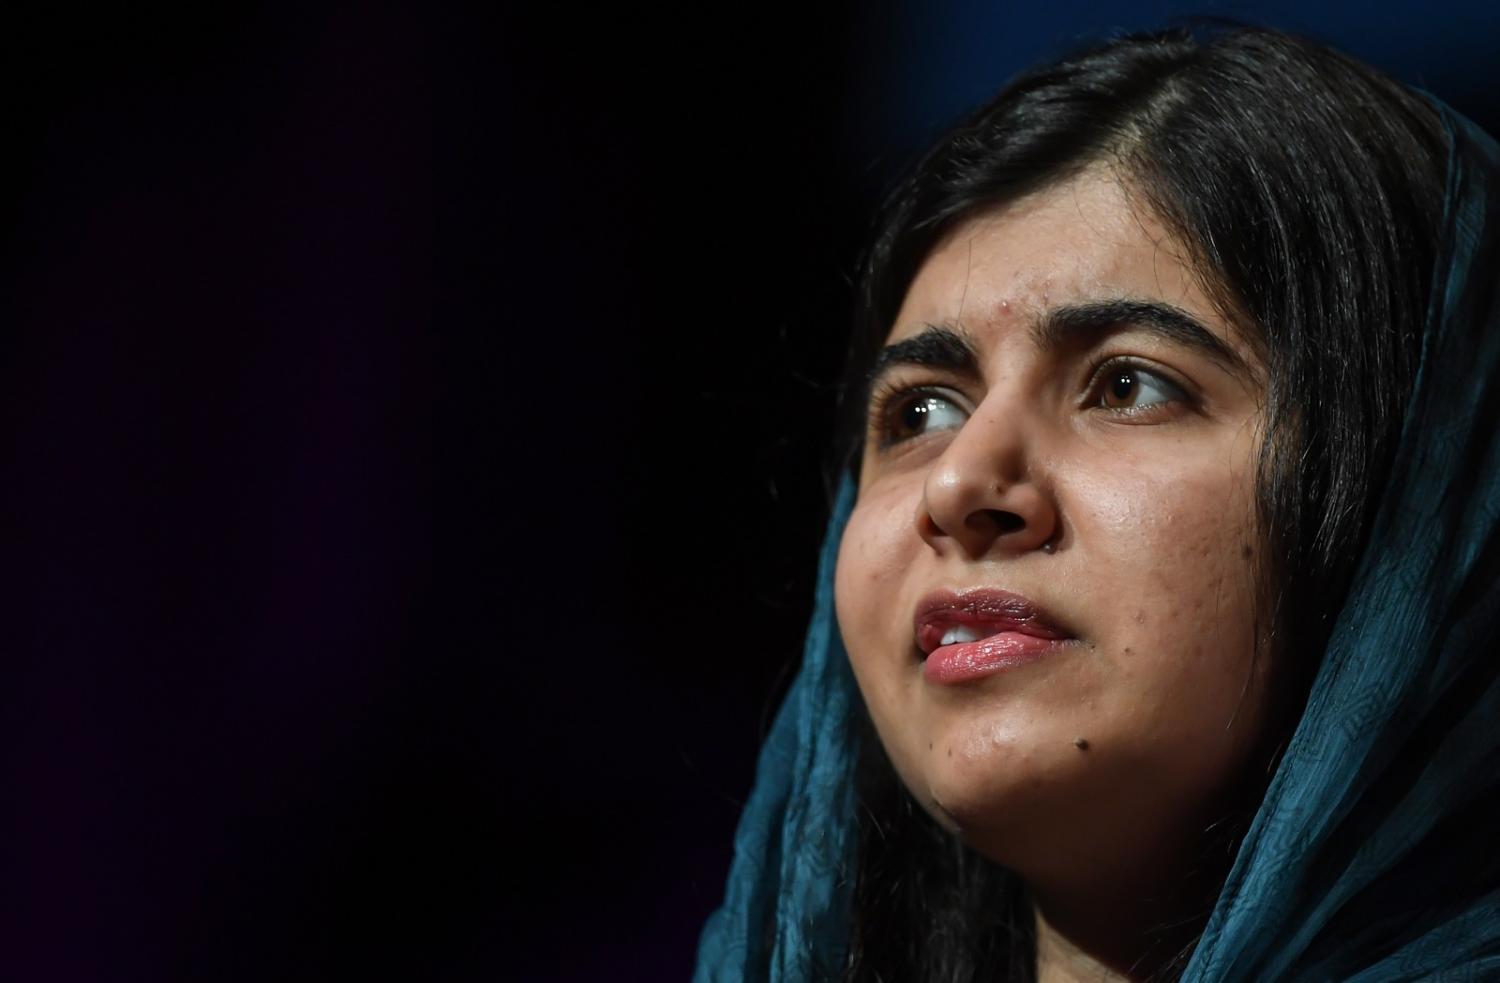 Malala Yousafzai survived an attempted assassination in 2012 and went on to become the youngest ever recipient of the Nobel Peace prize (James D Morgan/Getty Images for The Growth Faculty)